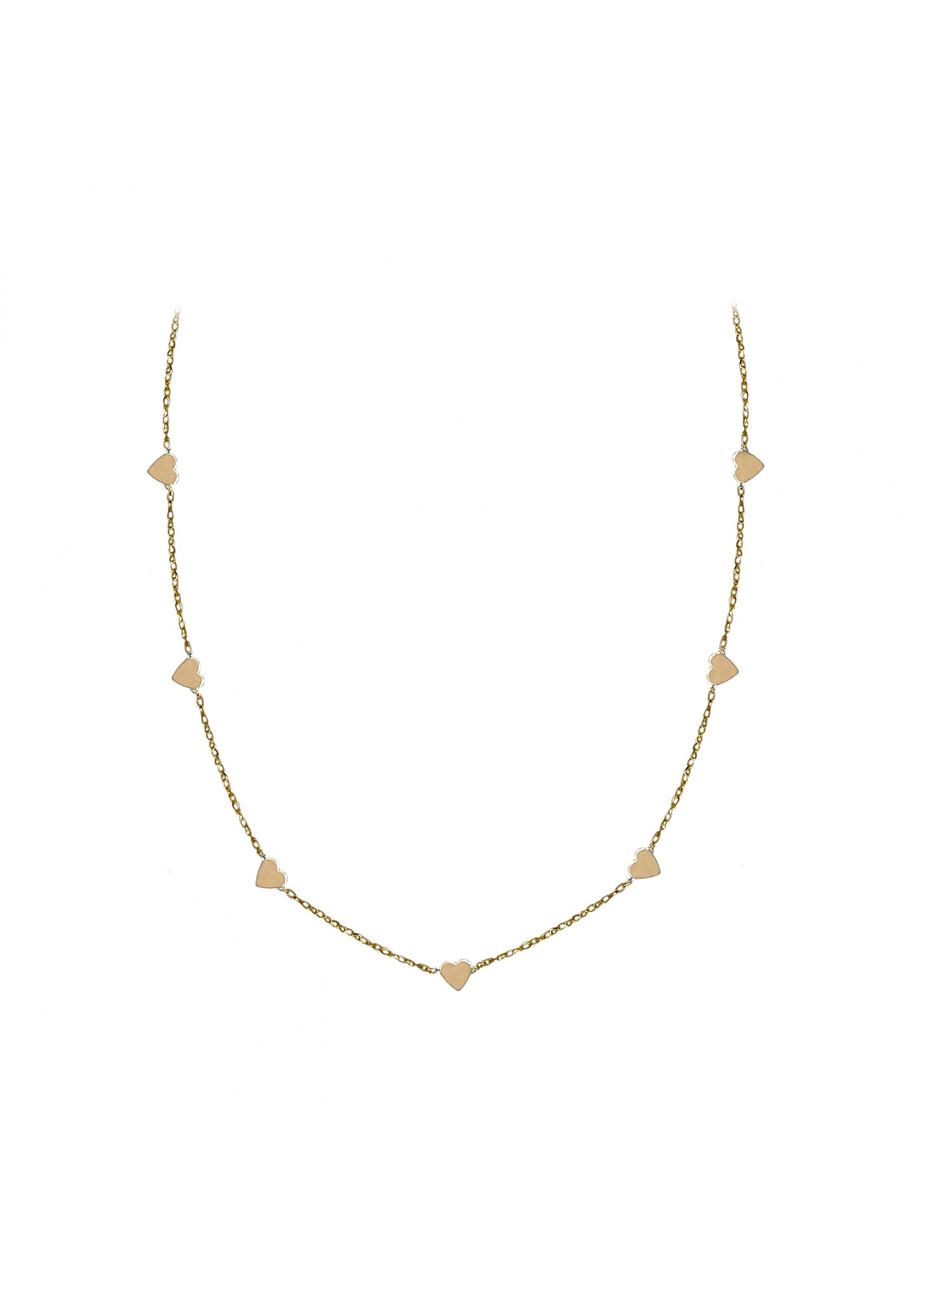 Alternating hearts or stars necklace in 18kt solid gold